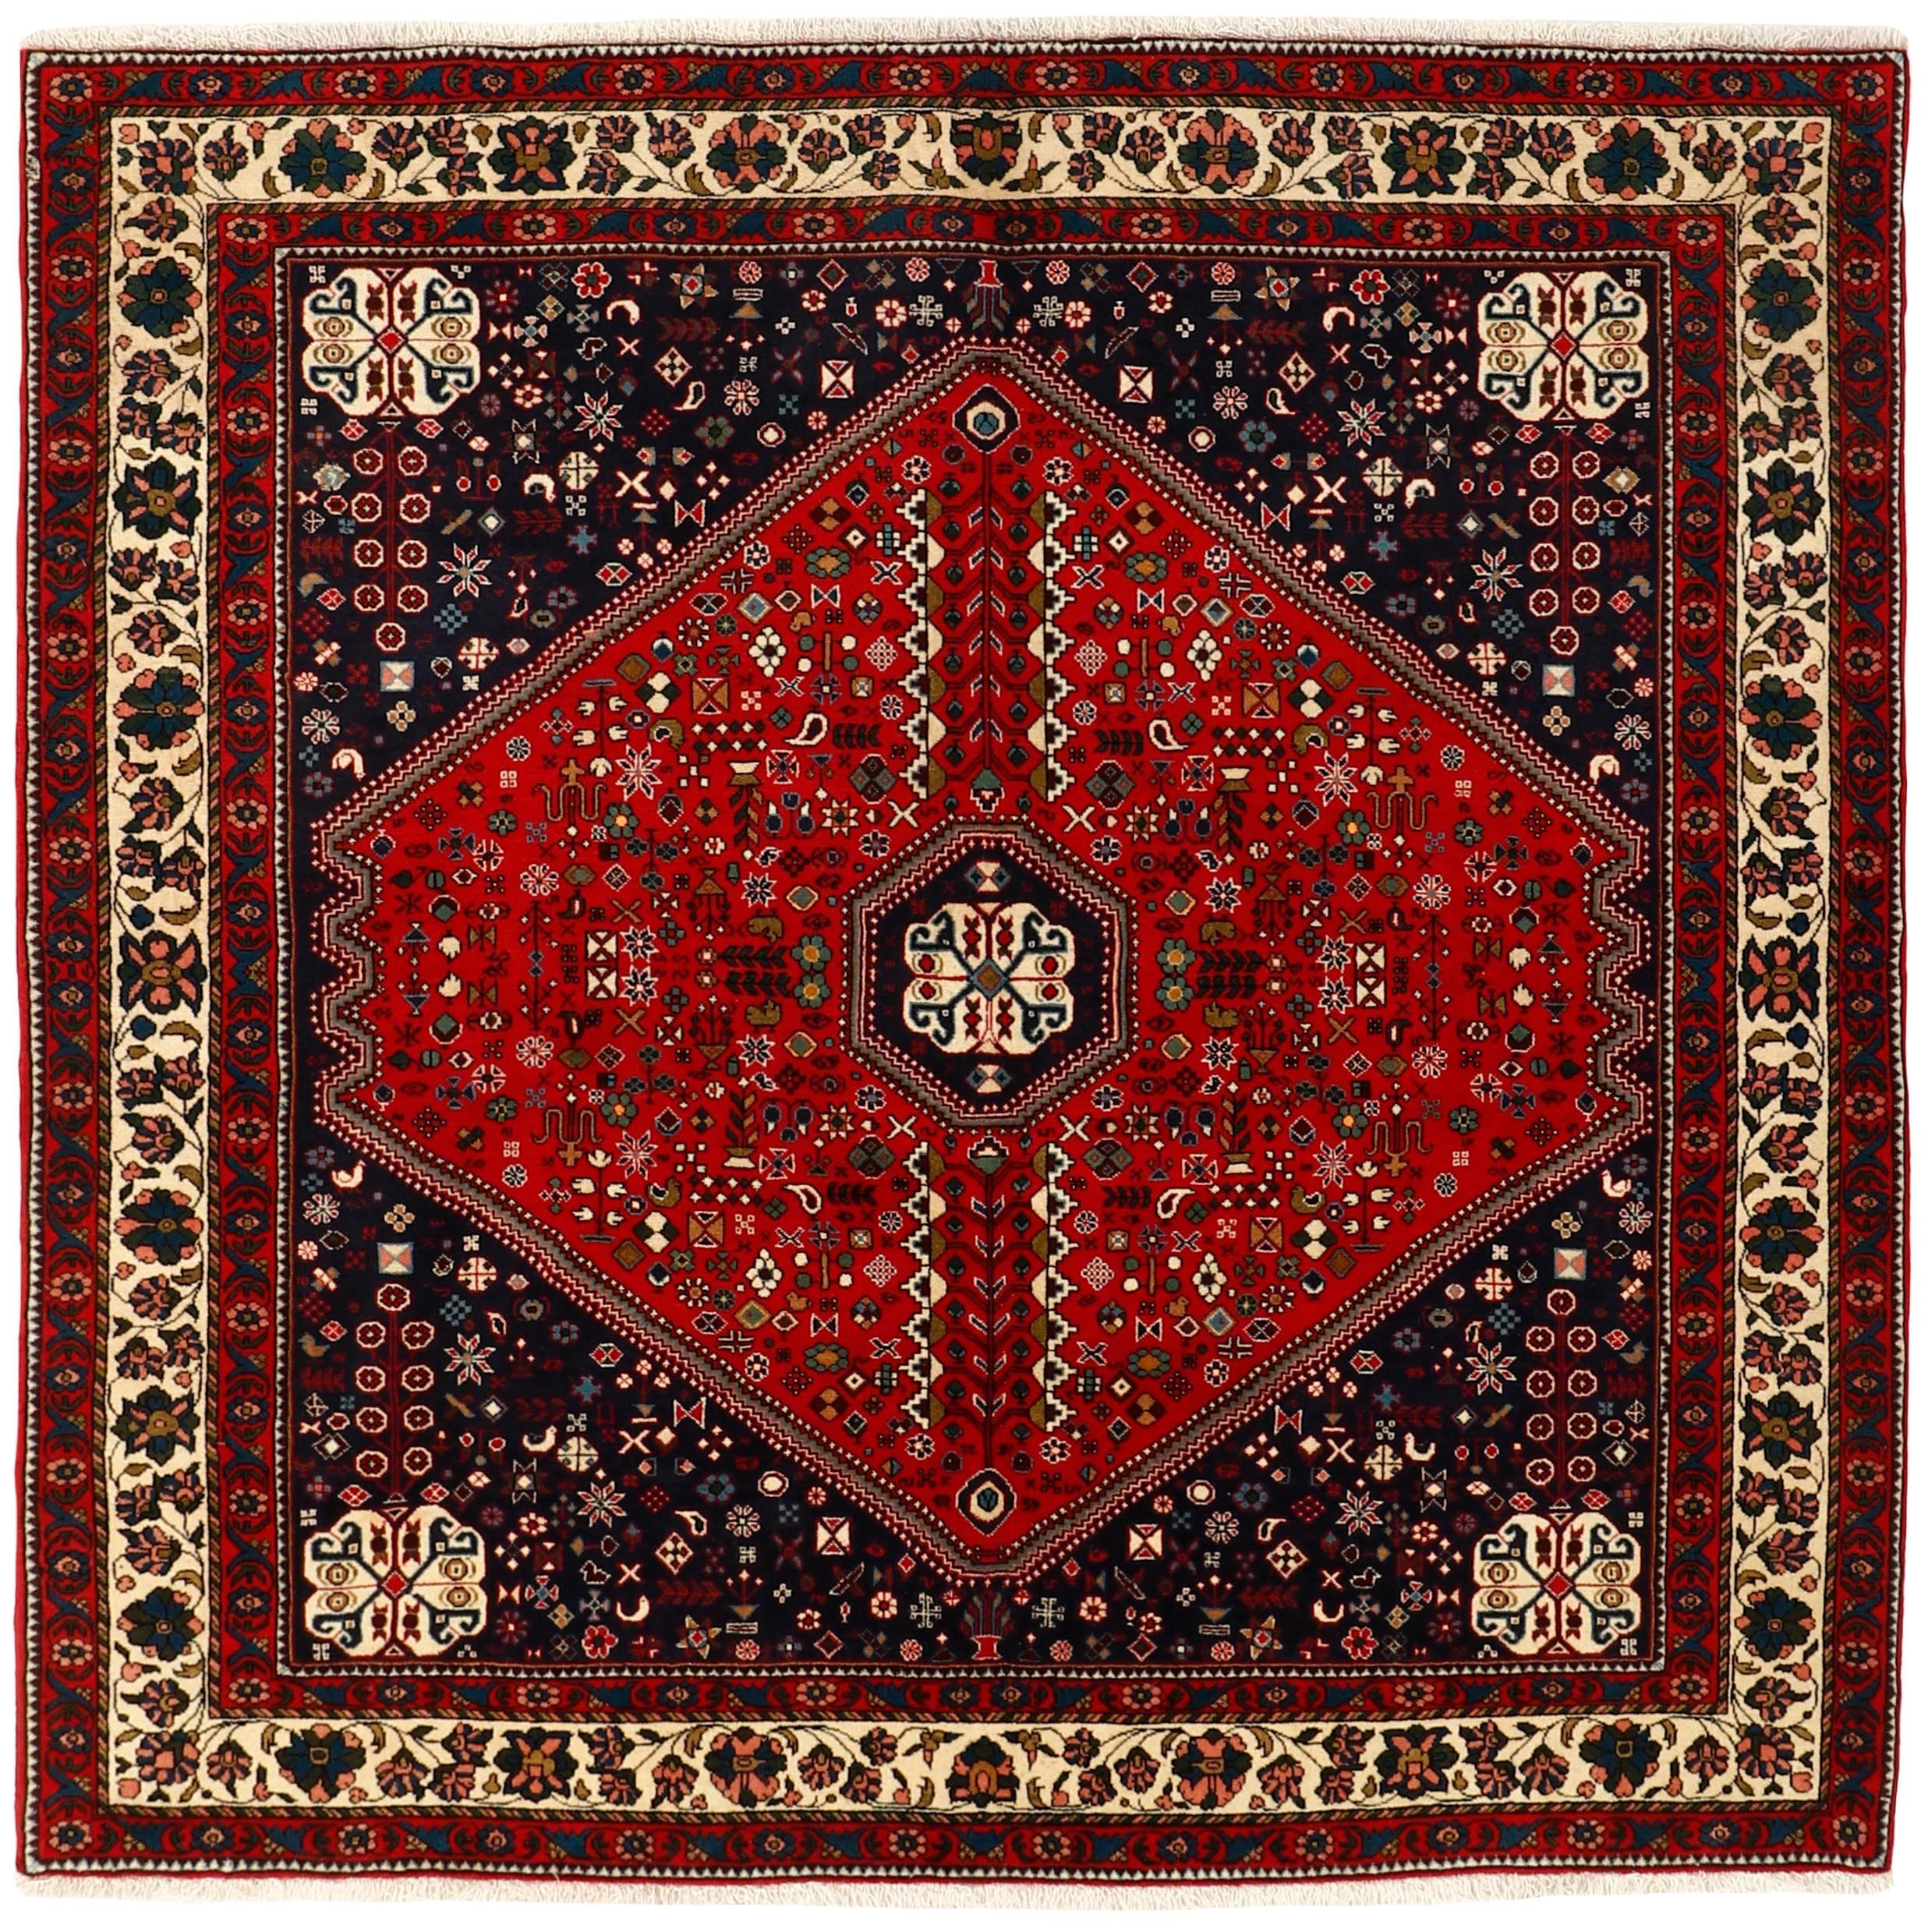 Authentic persian square rug with traditional tribal geometric design in red